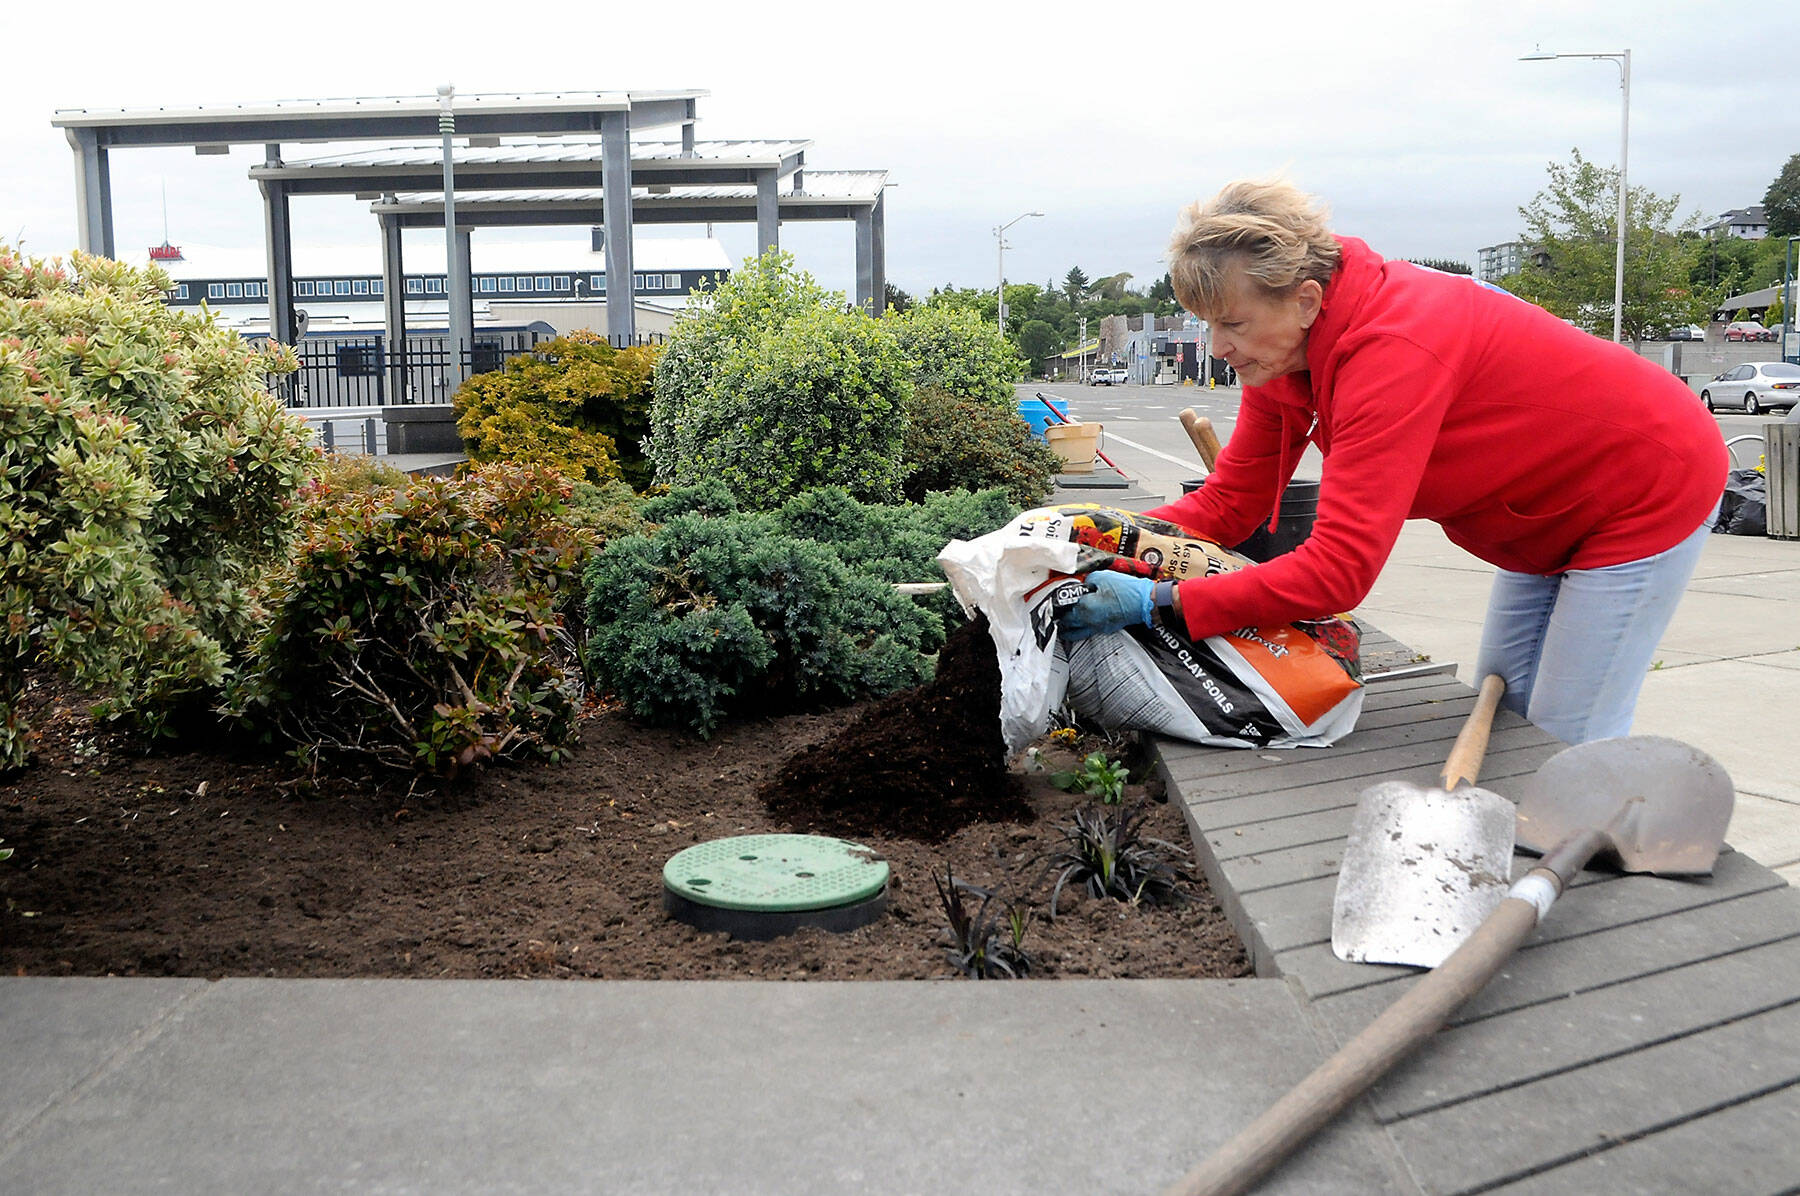 Mary Kelsoe of the Port Angeles Garden Club spreads topsoil in one of the decorative planters along the Esplanade along the Port Angeles waterfront on Wednesday. The planters, known as Billie Loo’s Garden after a longtime garden club member, are regularly maintained by fellow club members. (Keith Thorpe/Peninsula Daily News)